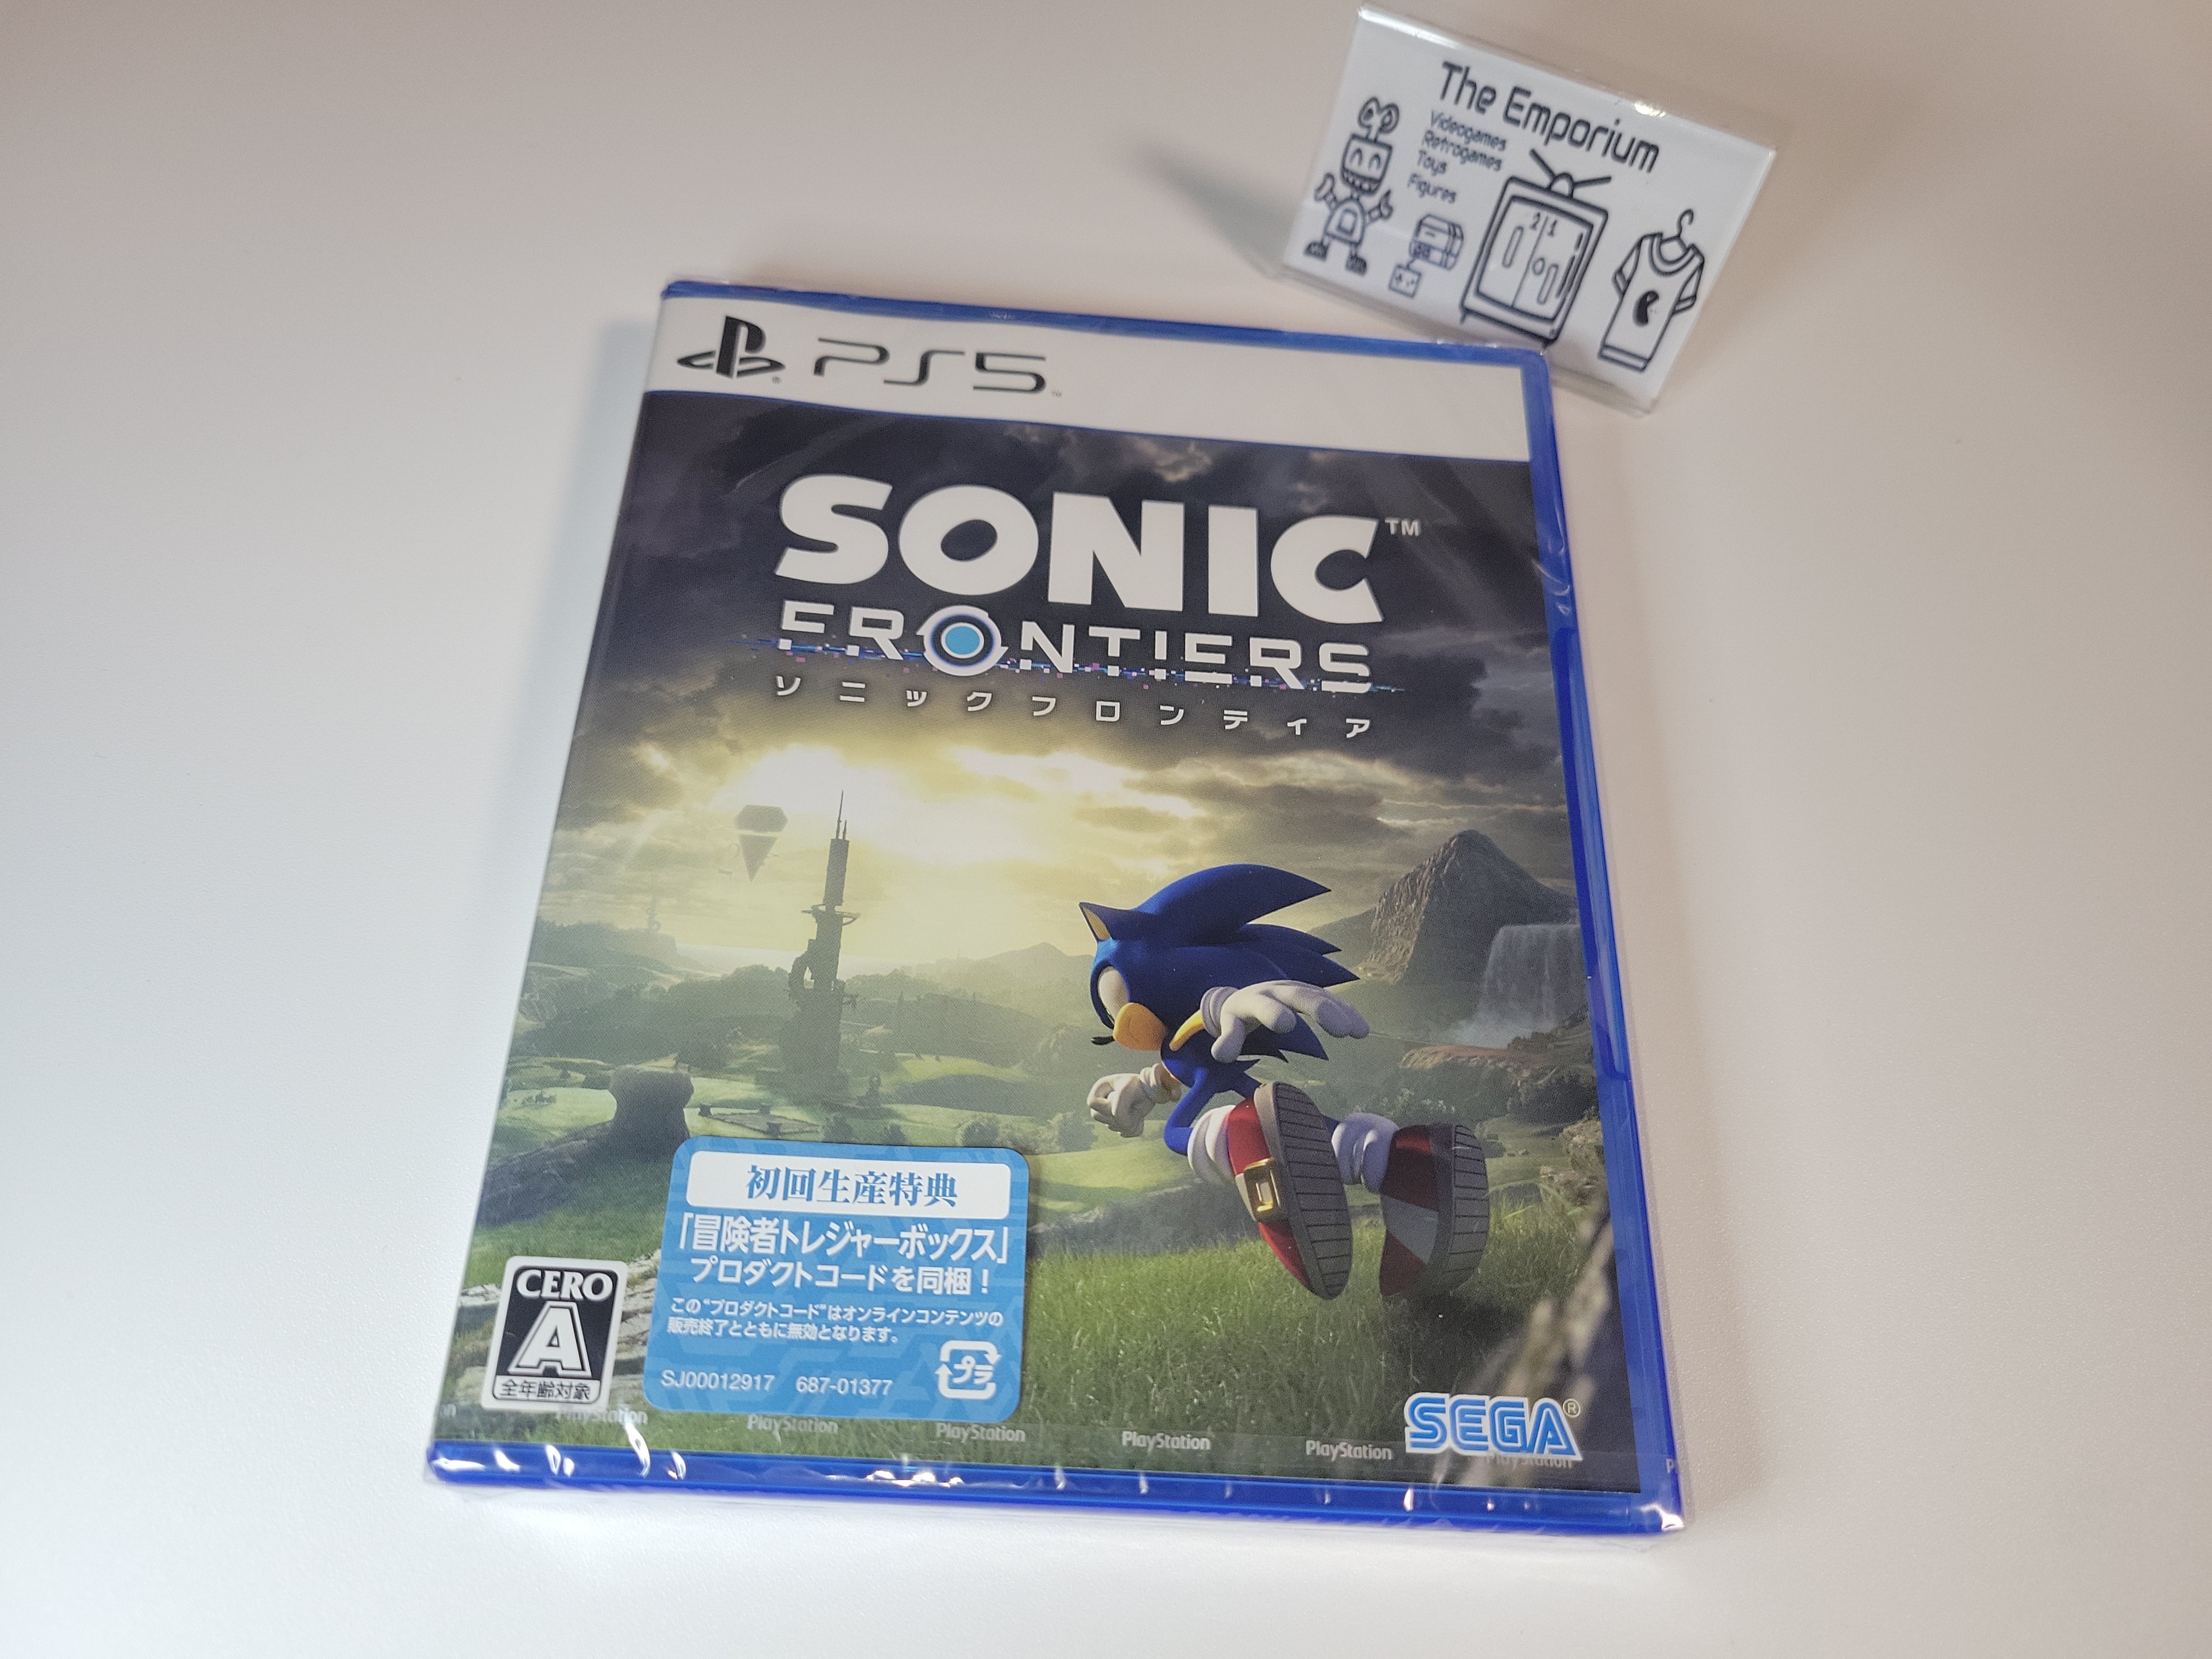 Sonic Frontiers - Sony PS5 Playstation 5 – The Emporium RetroGames